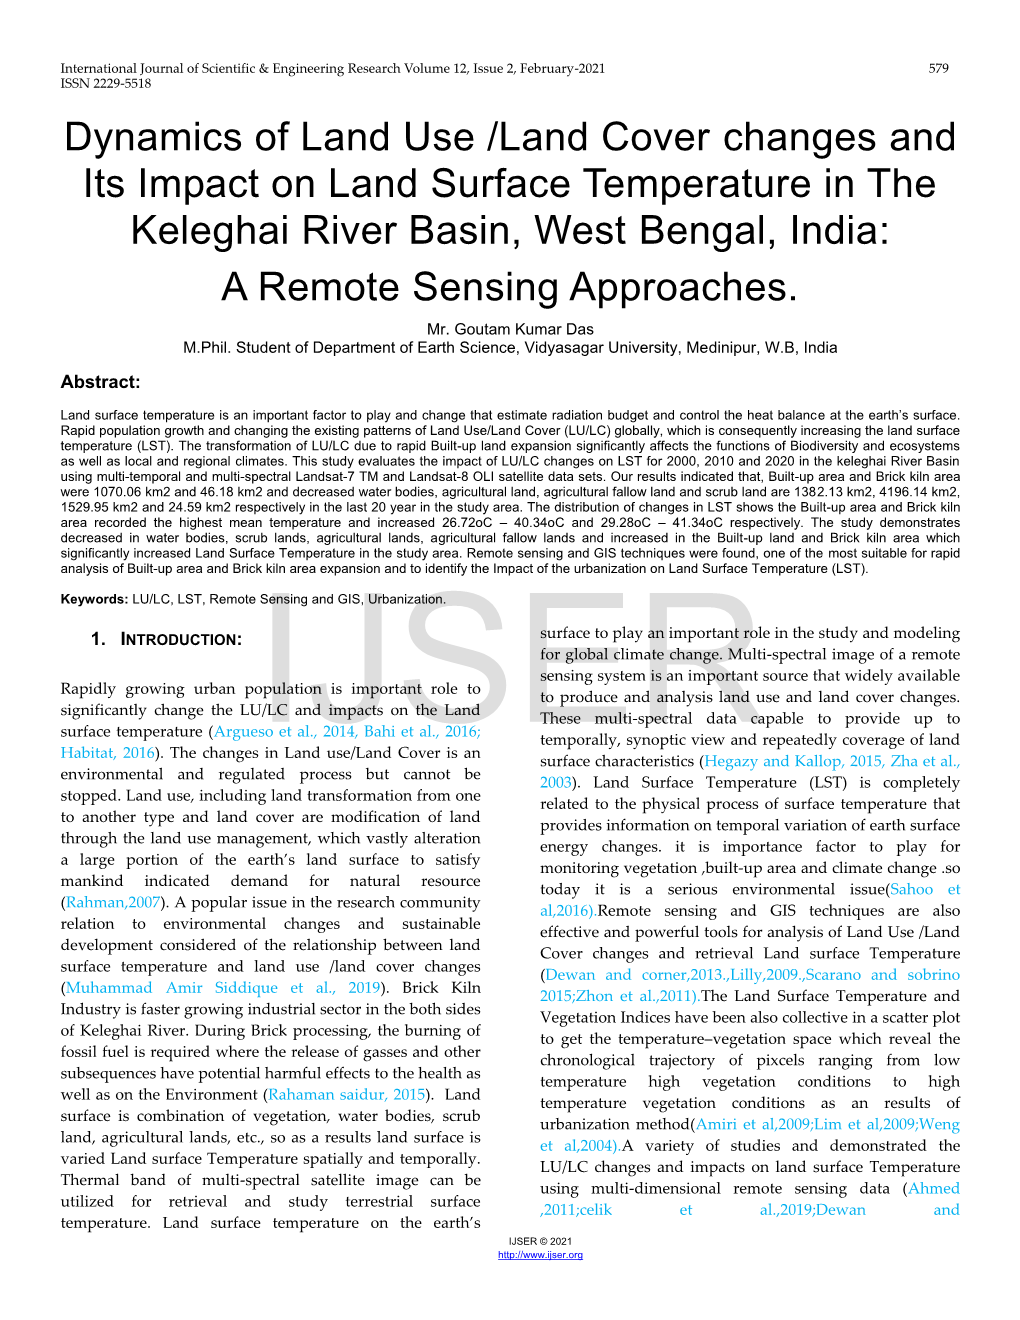 Dynamics of Land Use /Land Cover Changes and Its Impact on Land Surface Temperature in the Keleghai River Basin, West Bengal, India: a Remote Sensing Approaches